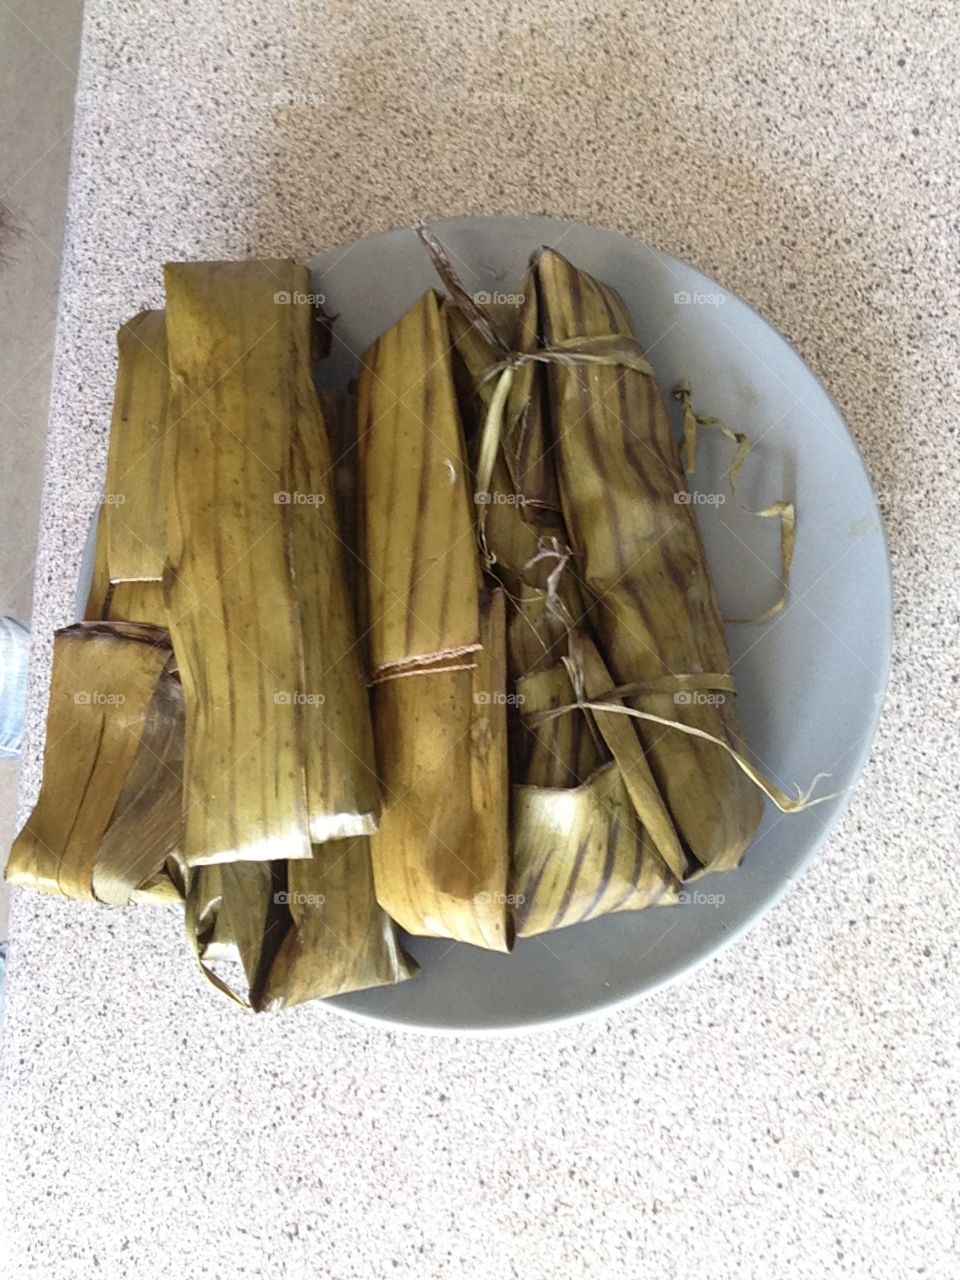 Banana leaves staffed with glutinus rice, very a famous dessert in my country and these is good for coffee and te.